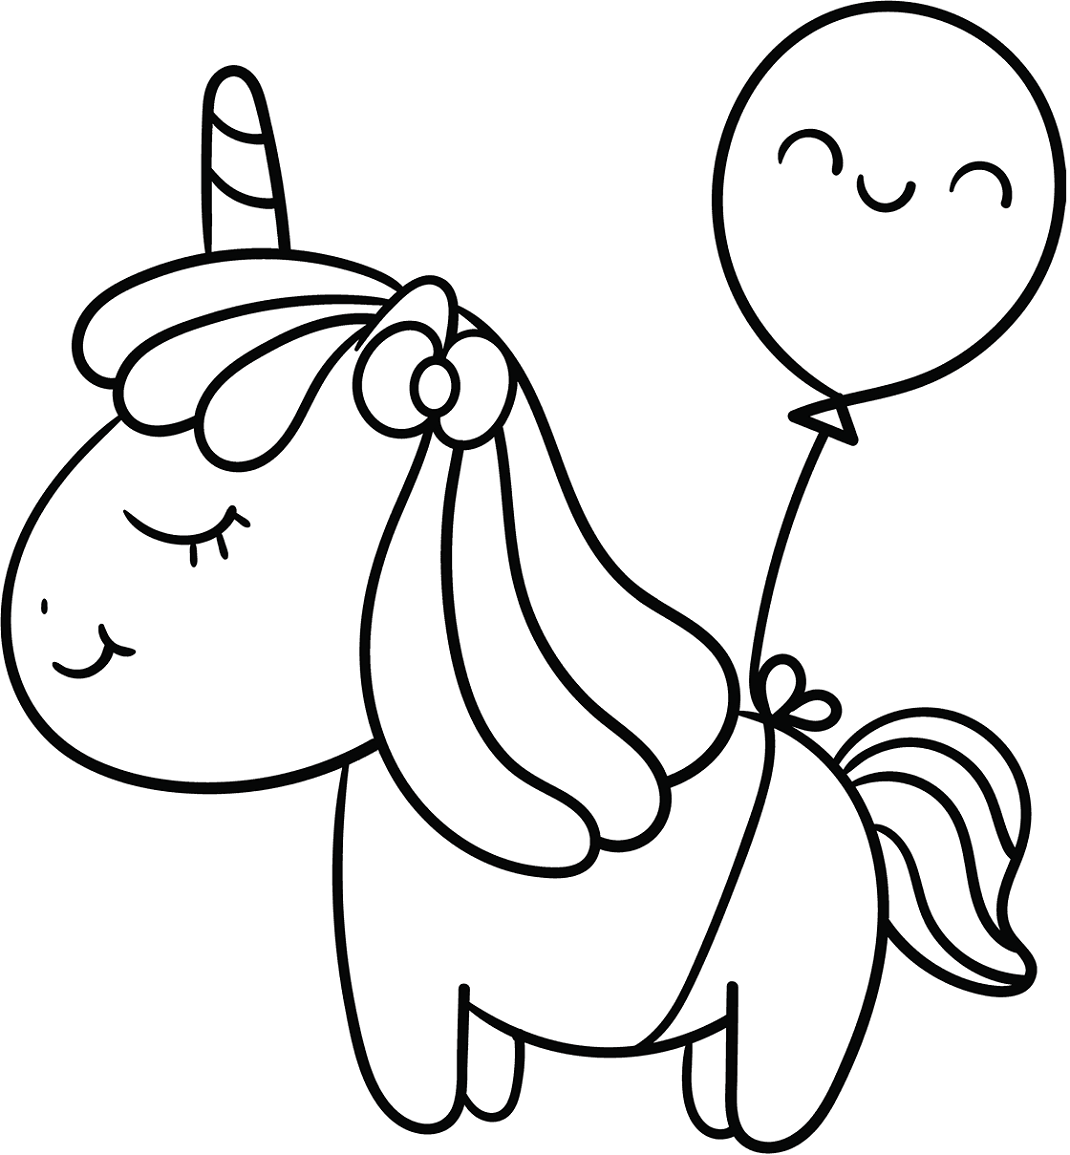 33+ Colouring Super Cute Cute Baby Unicorn Coloring Pages Gif